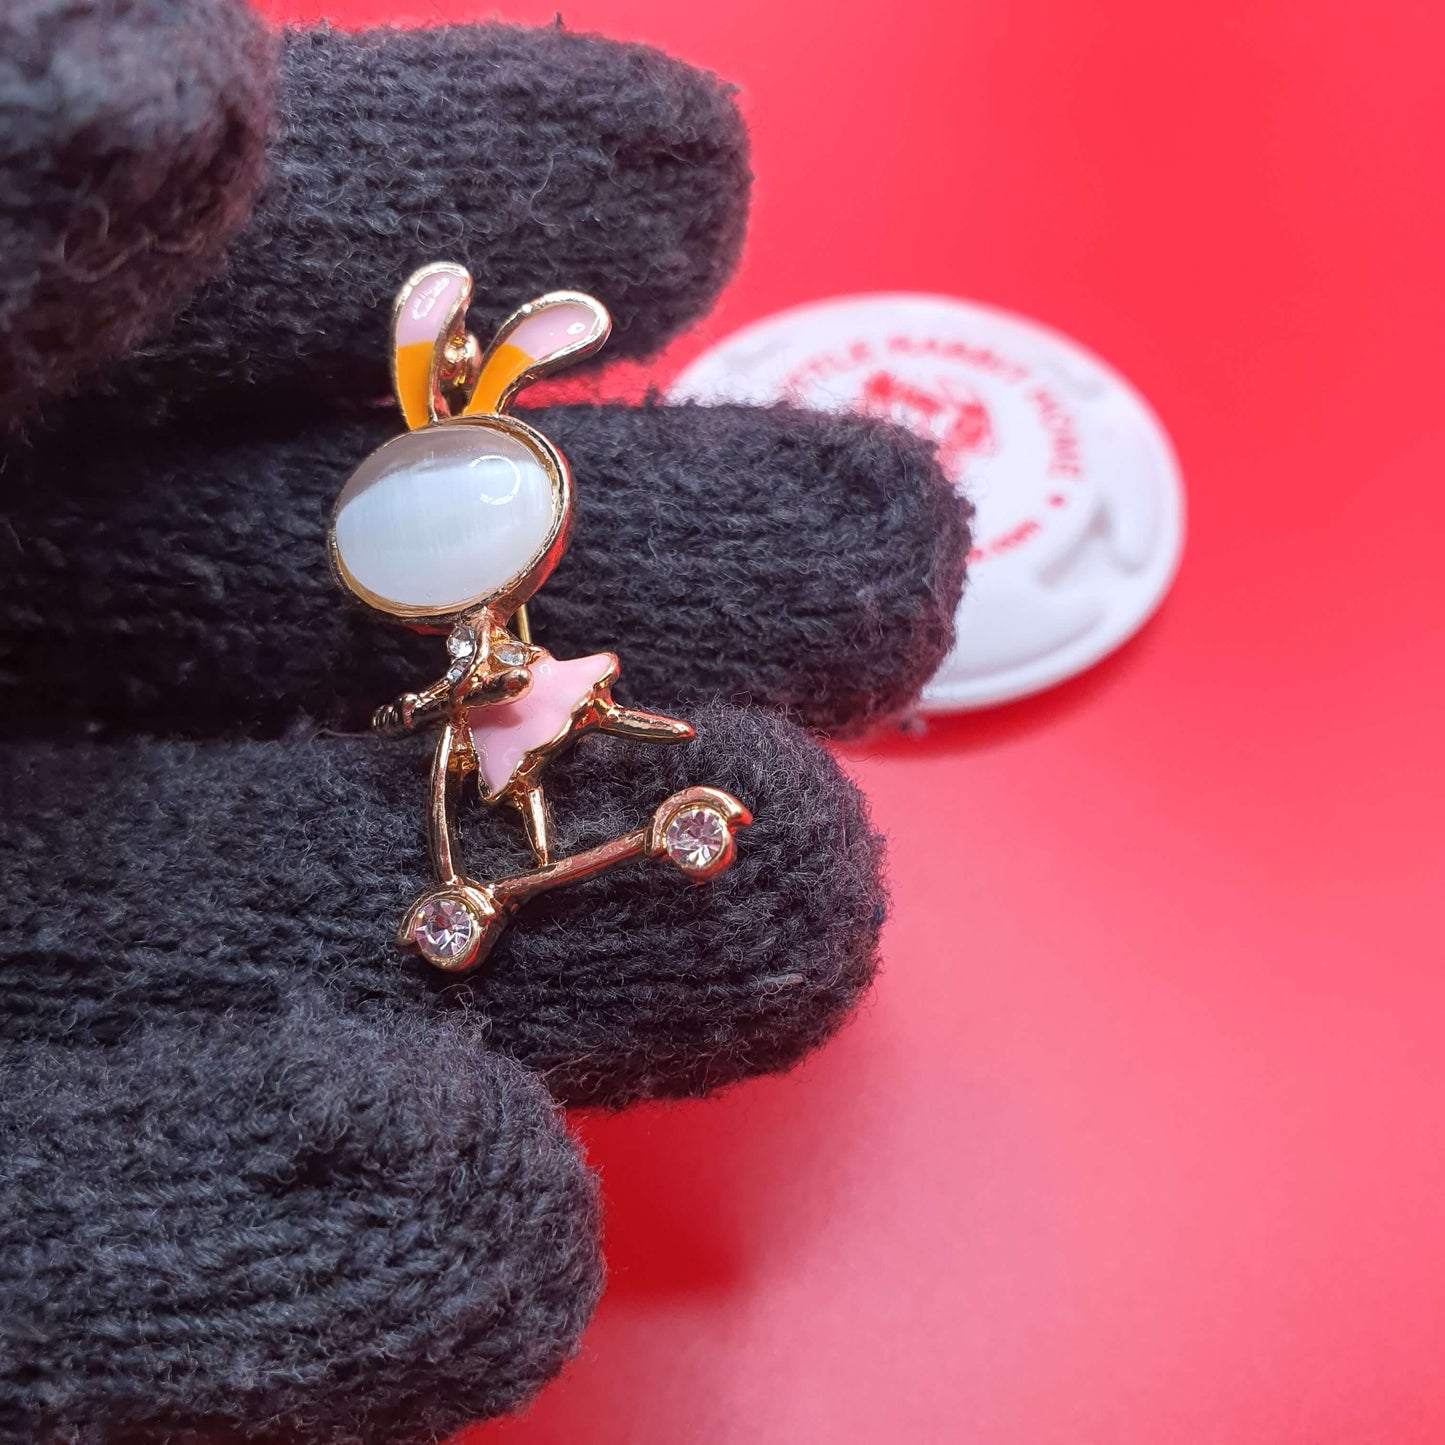 Pink Scooter Bunny brooch (2pcs pack)